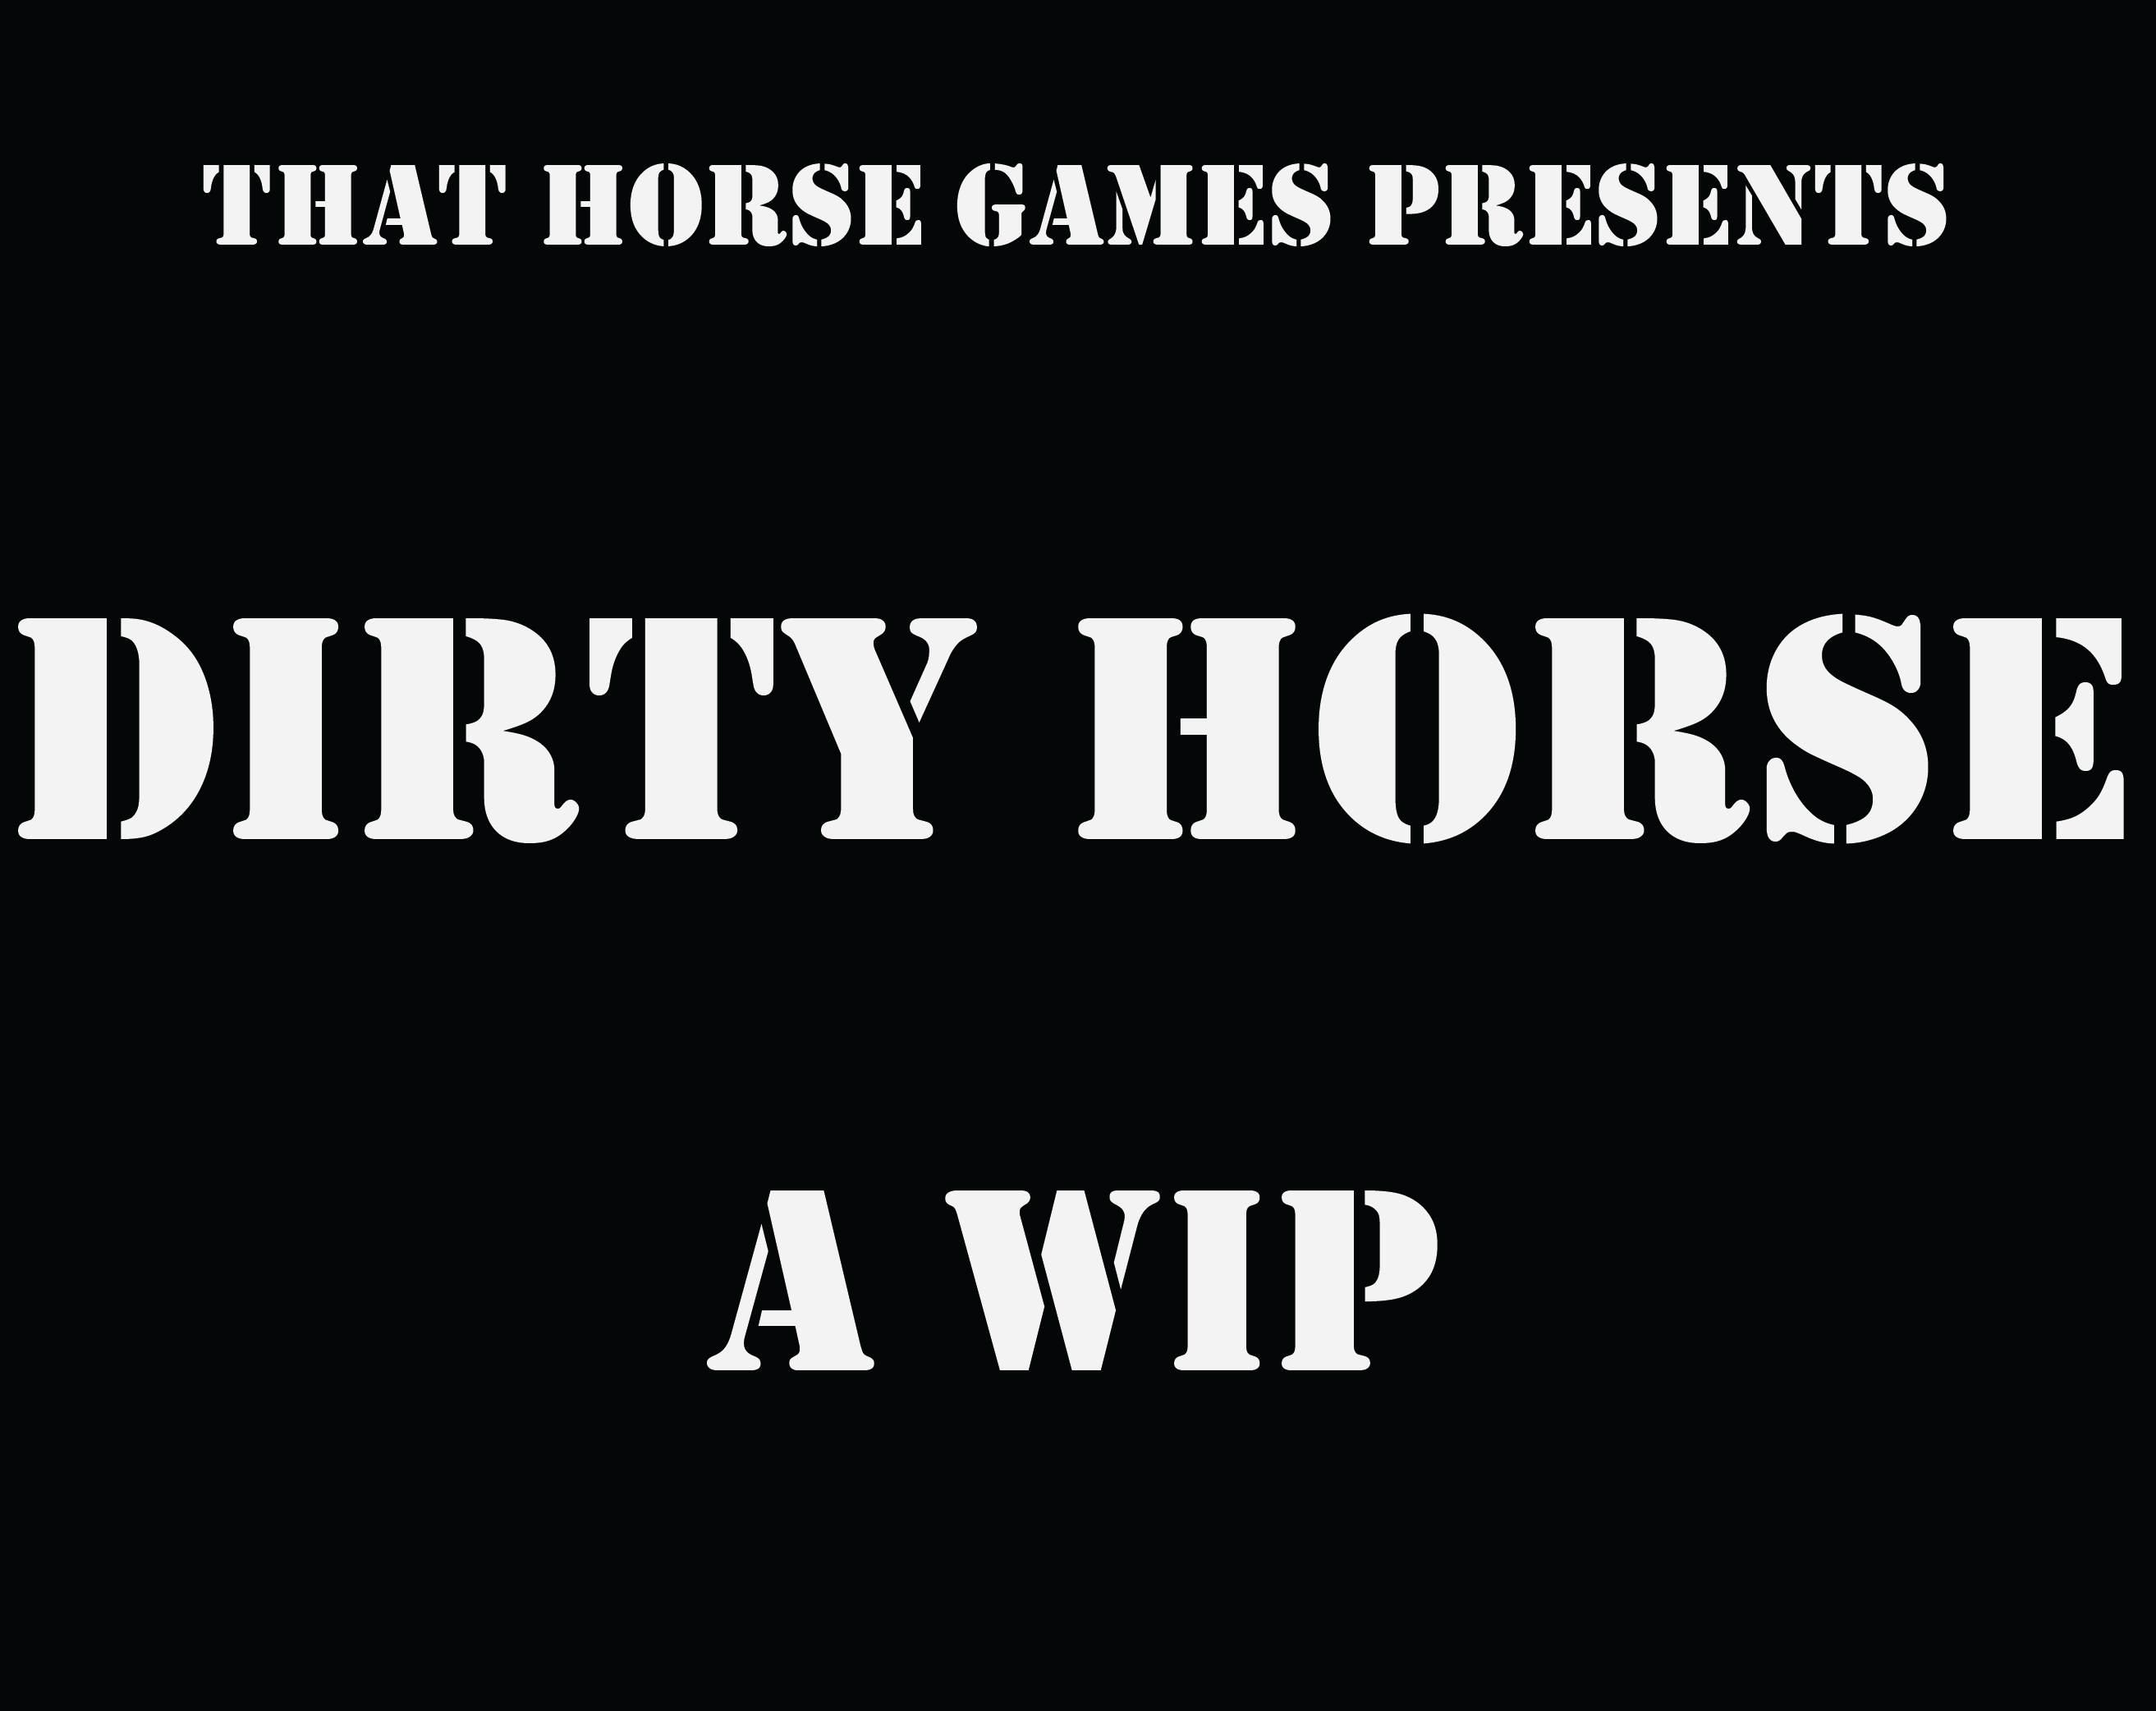 Gay Erotic Furry Game WIP - Dirty Horse by thathorsegames